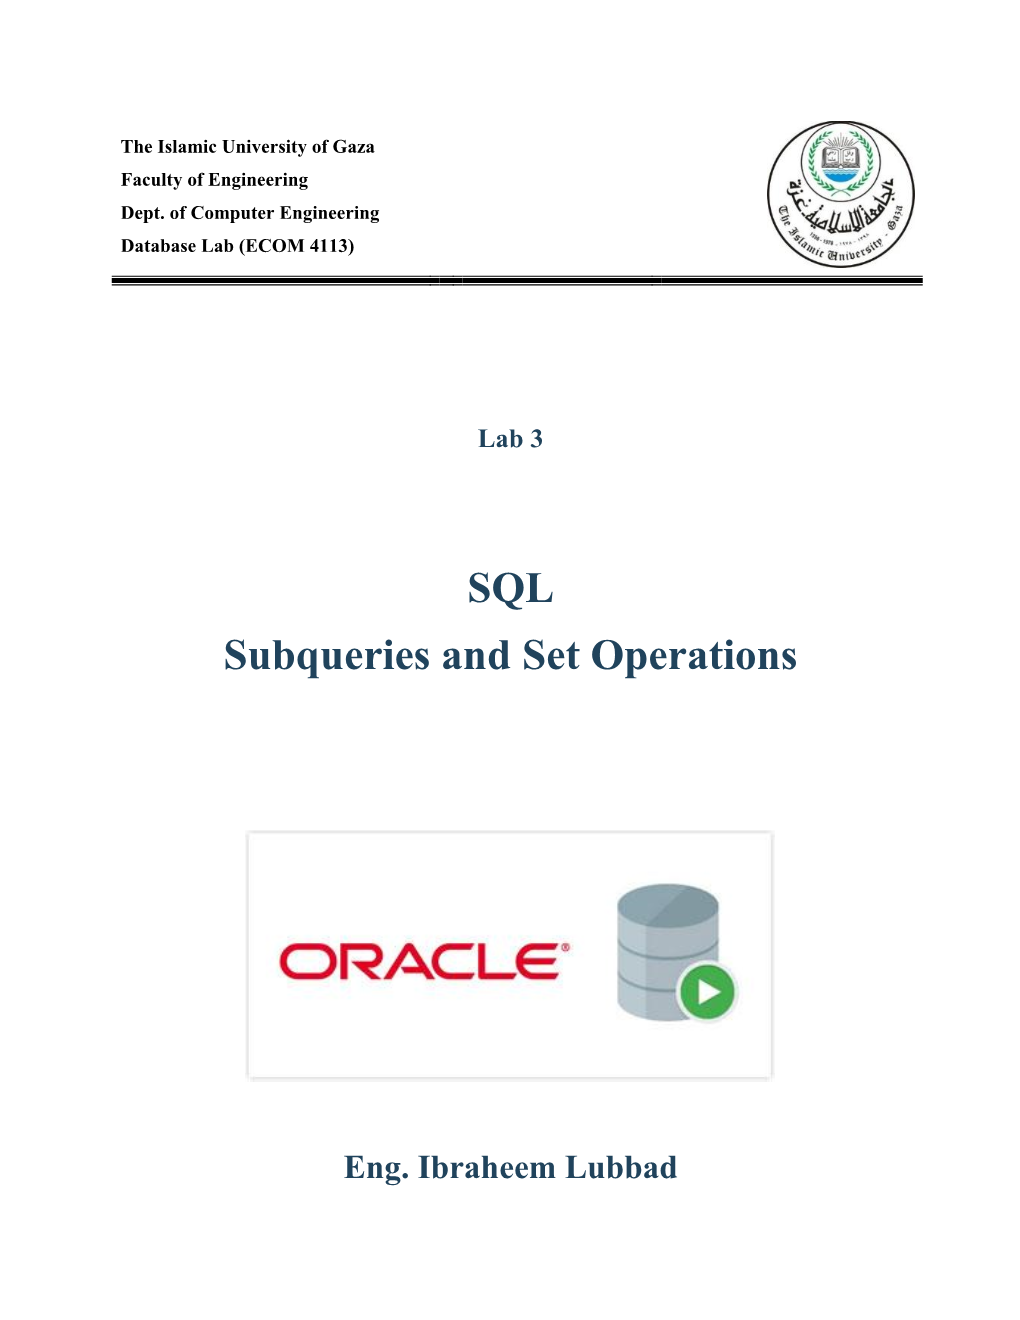 SQL Subqueries and Set Operations